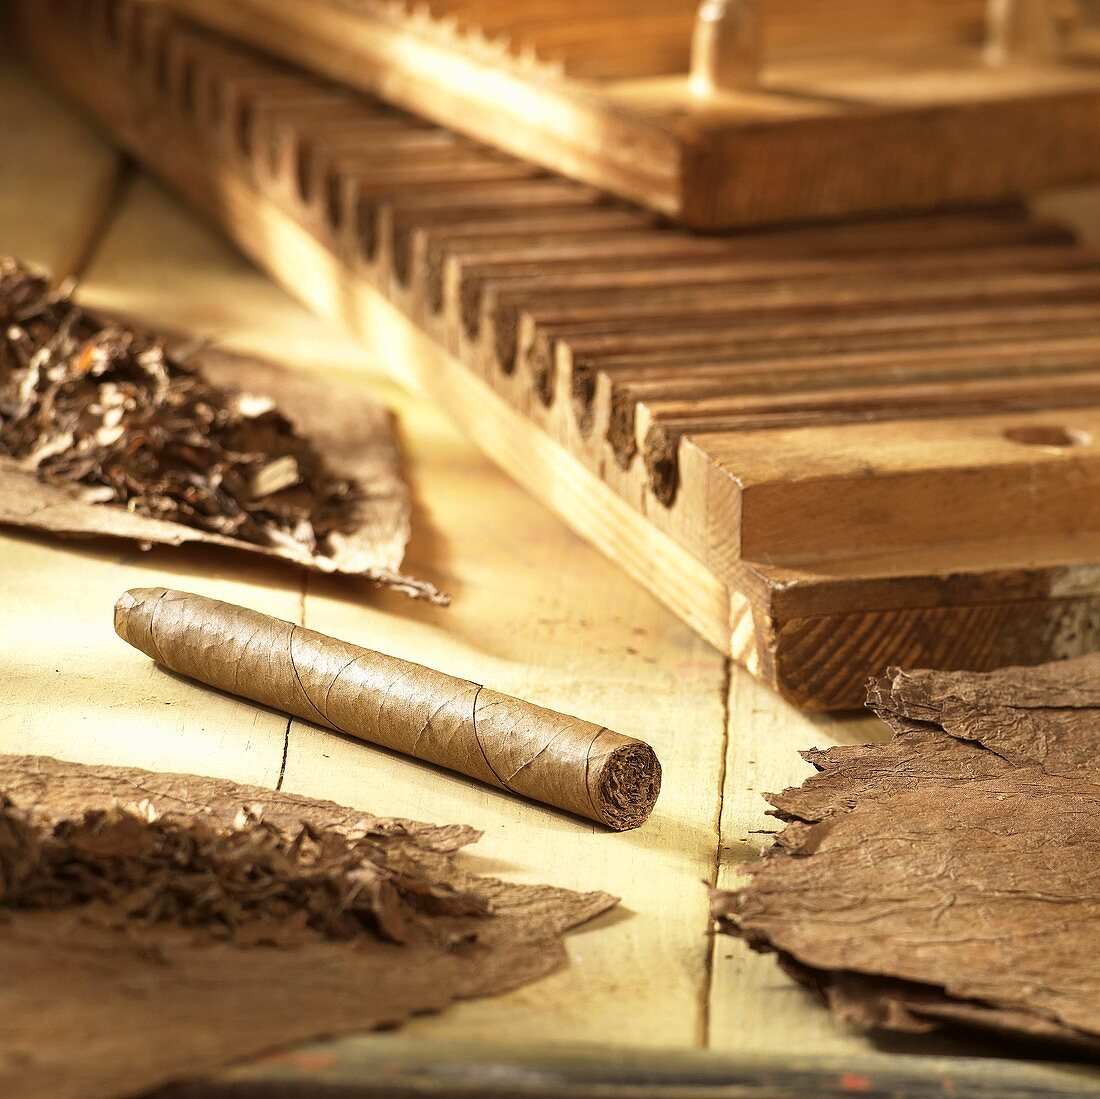 Cigar-making: cigars, tobacco leaves and tool